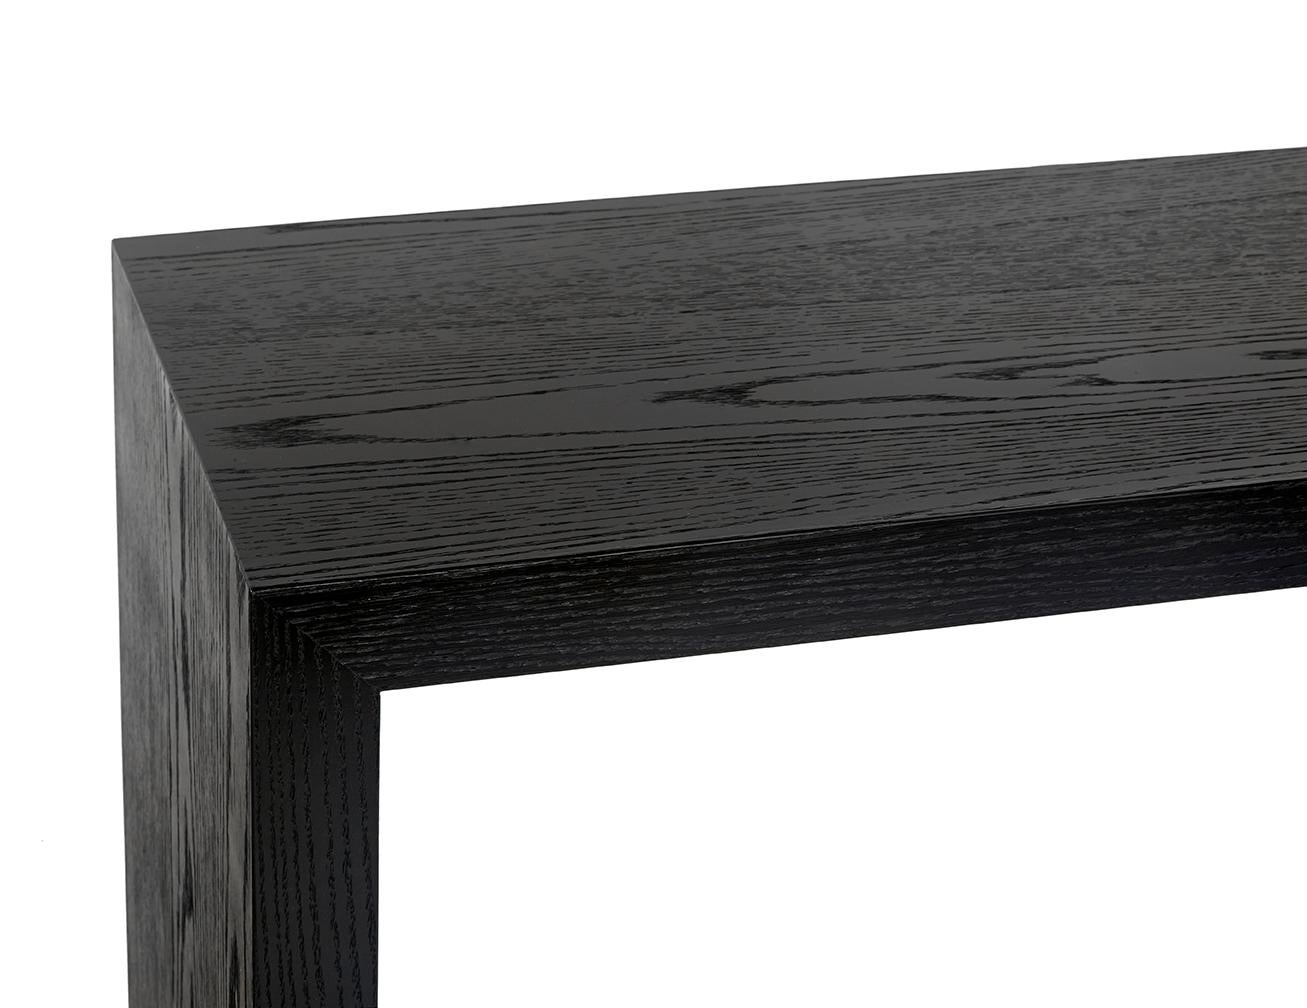 The Jefferson console is a Minimalist’s dream with a slim and clean profile ideal for small spaces.